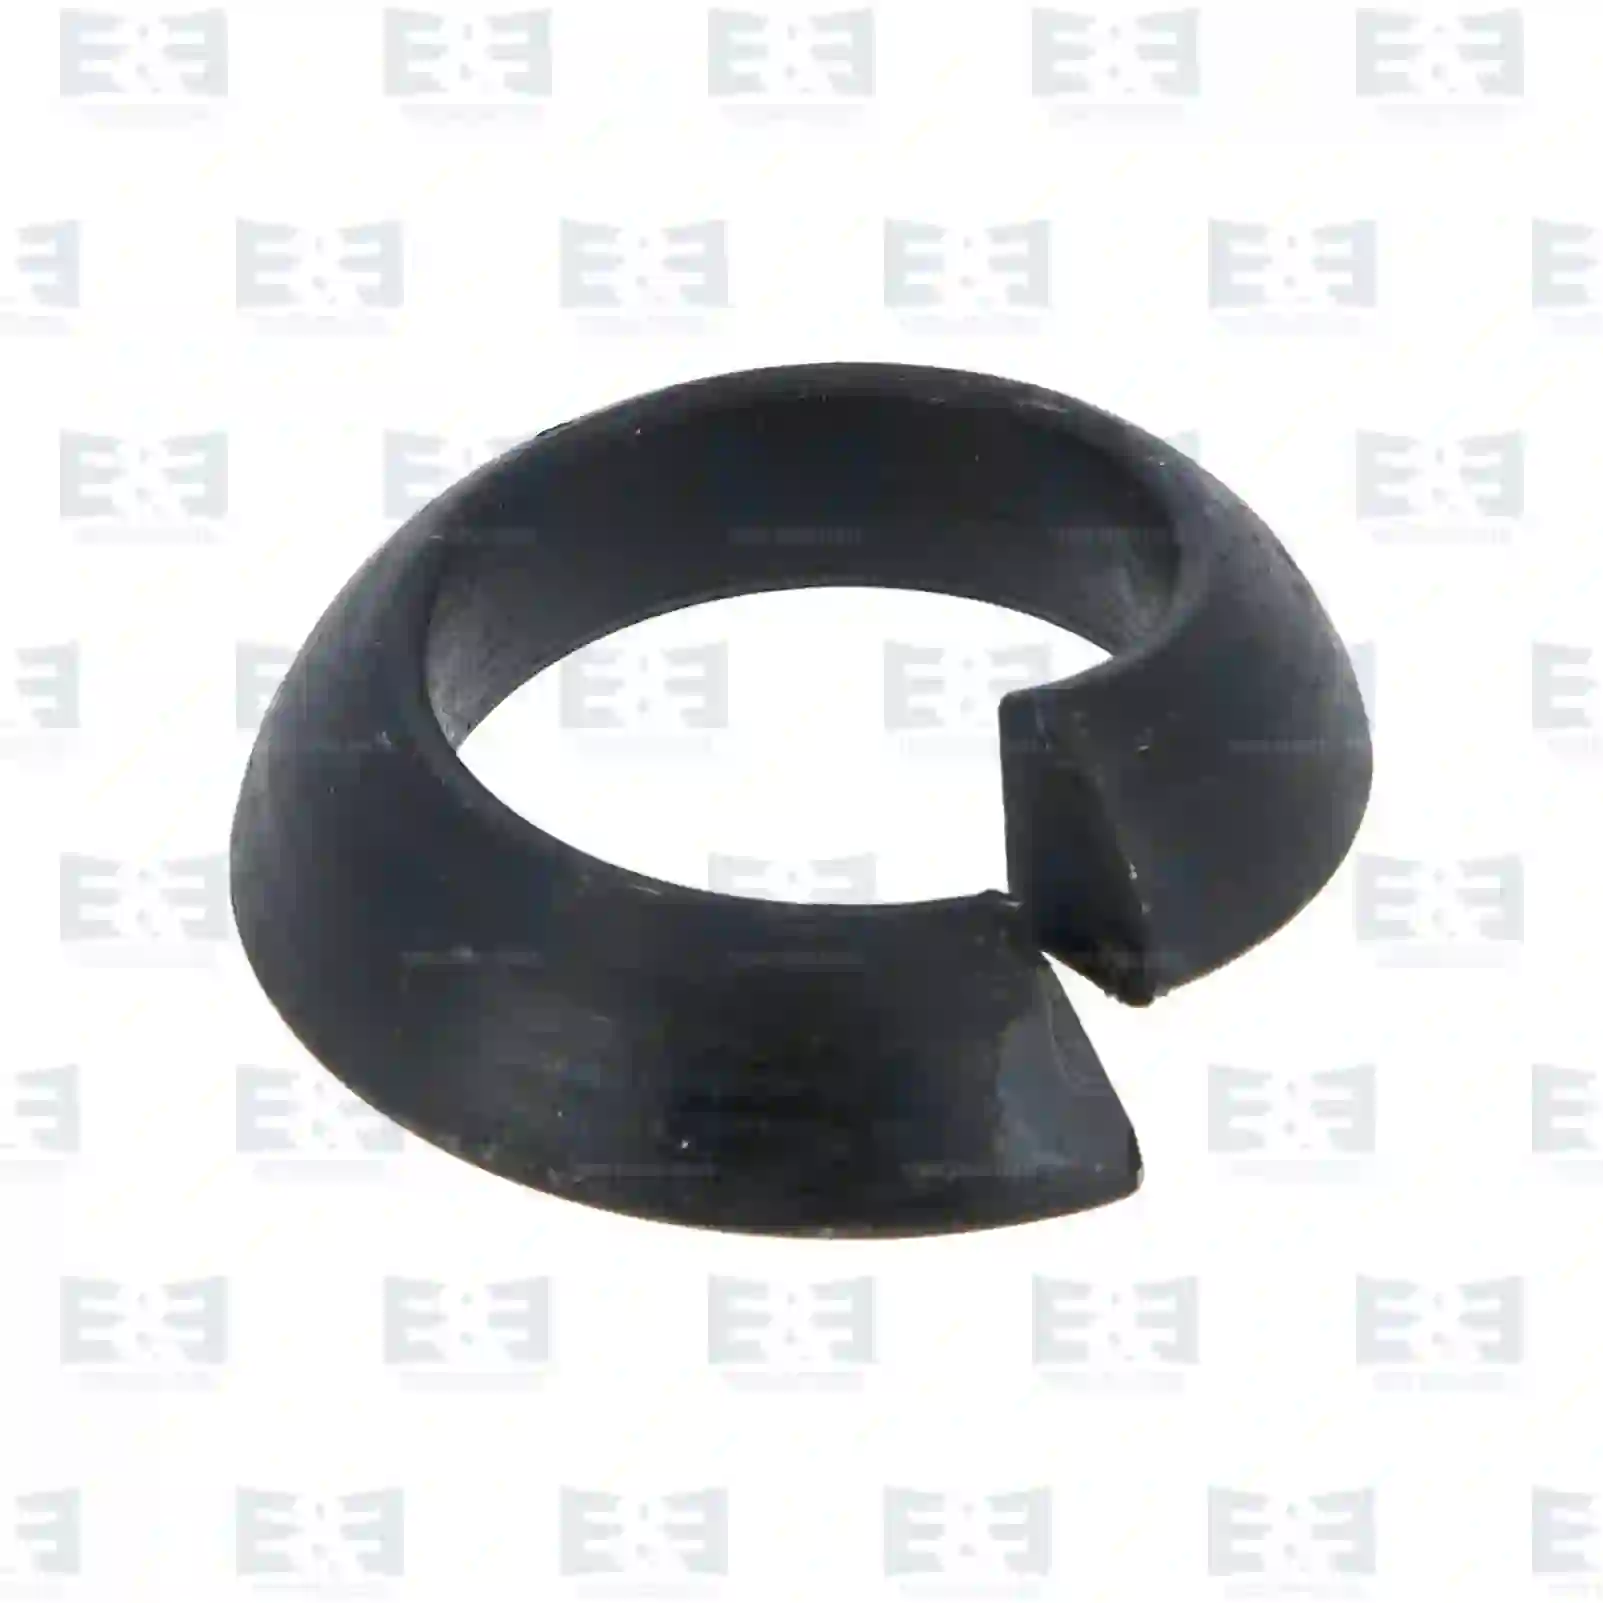  Spring ring || E&E Truck Spare Parts | Truck Spare Parts, Auotomotive Spare Parts